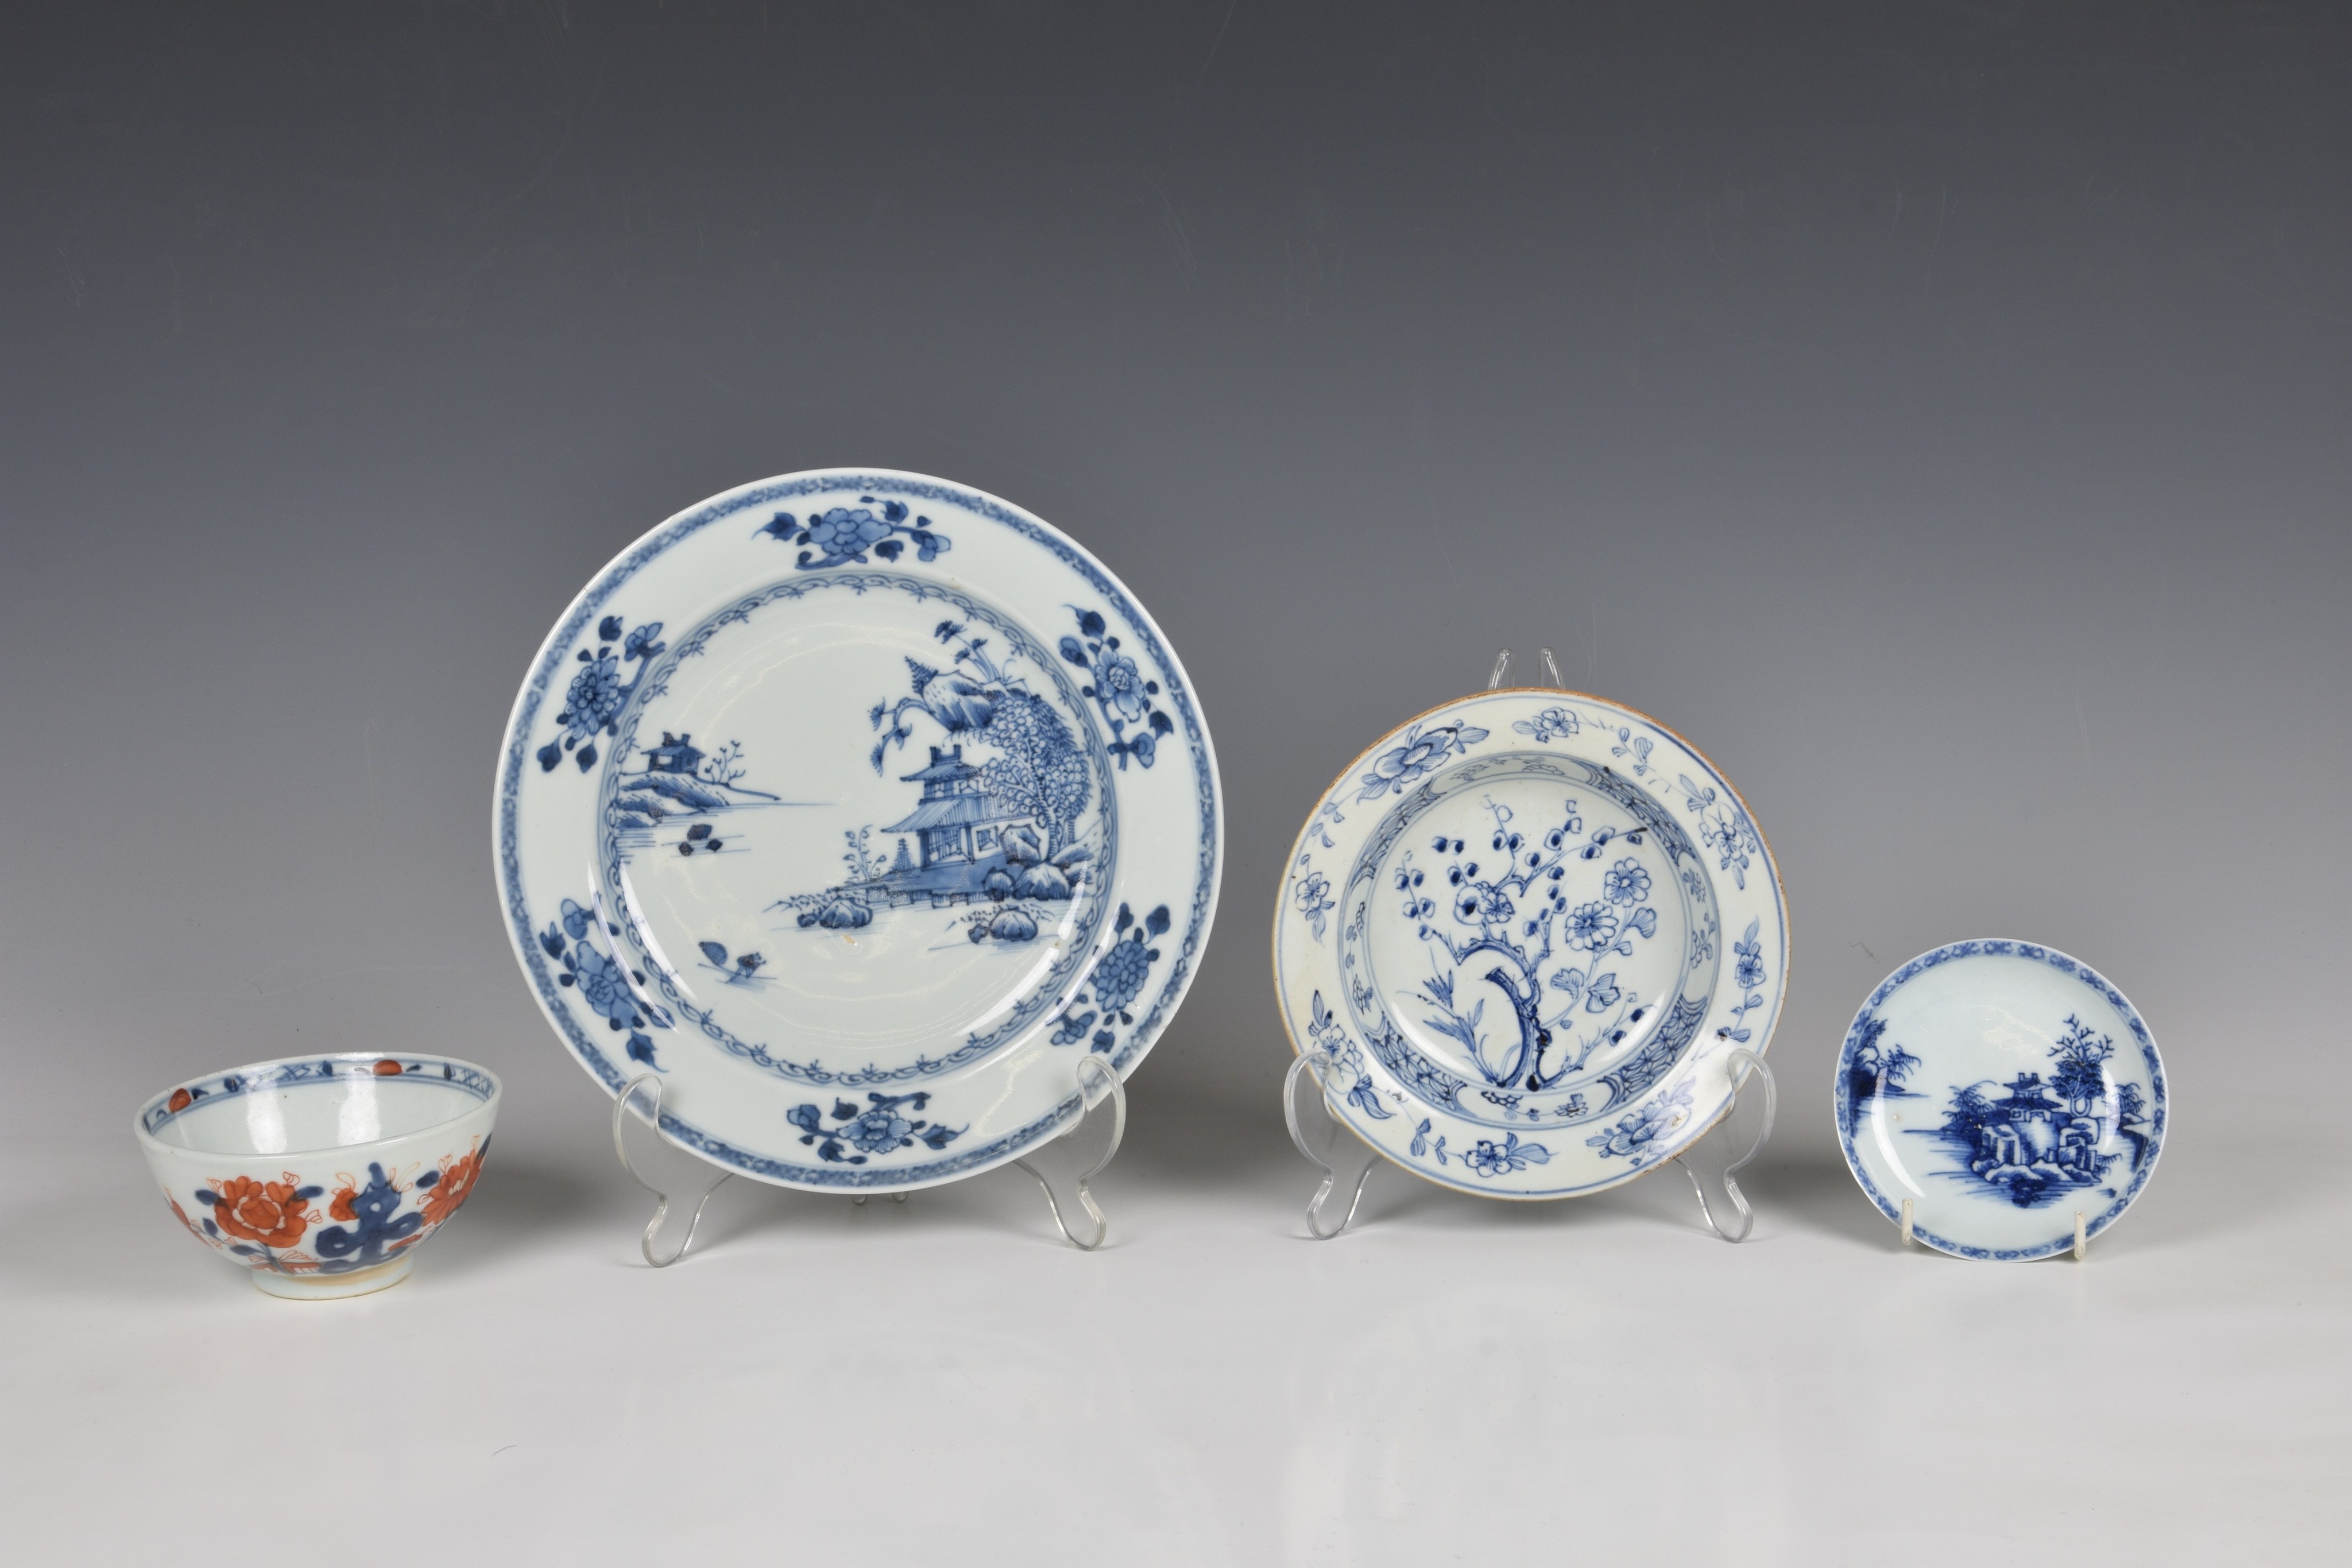 Two pieces of Chinese porcelain from the Nanking Cargo, 18th century, blue and white, comprising a